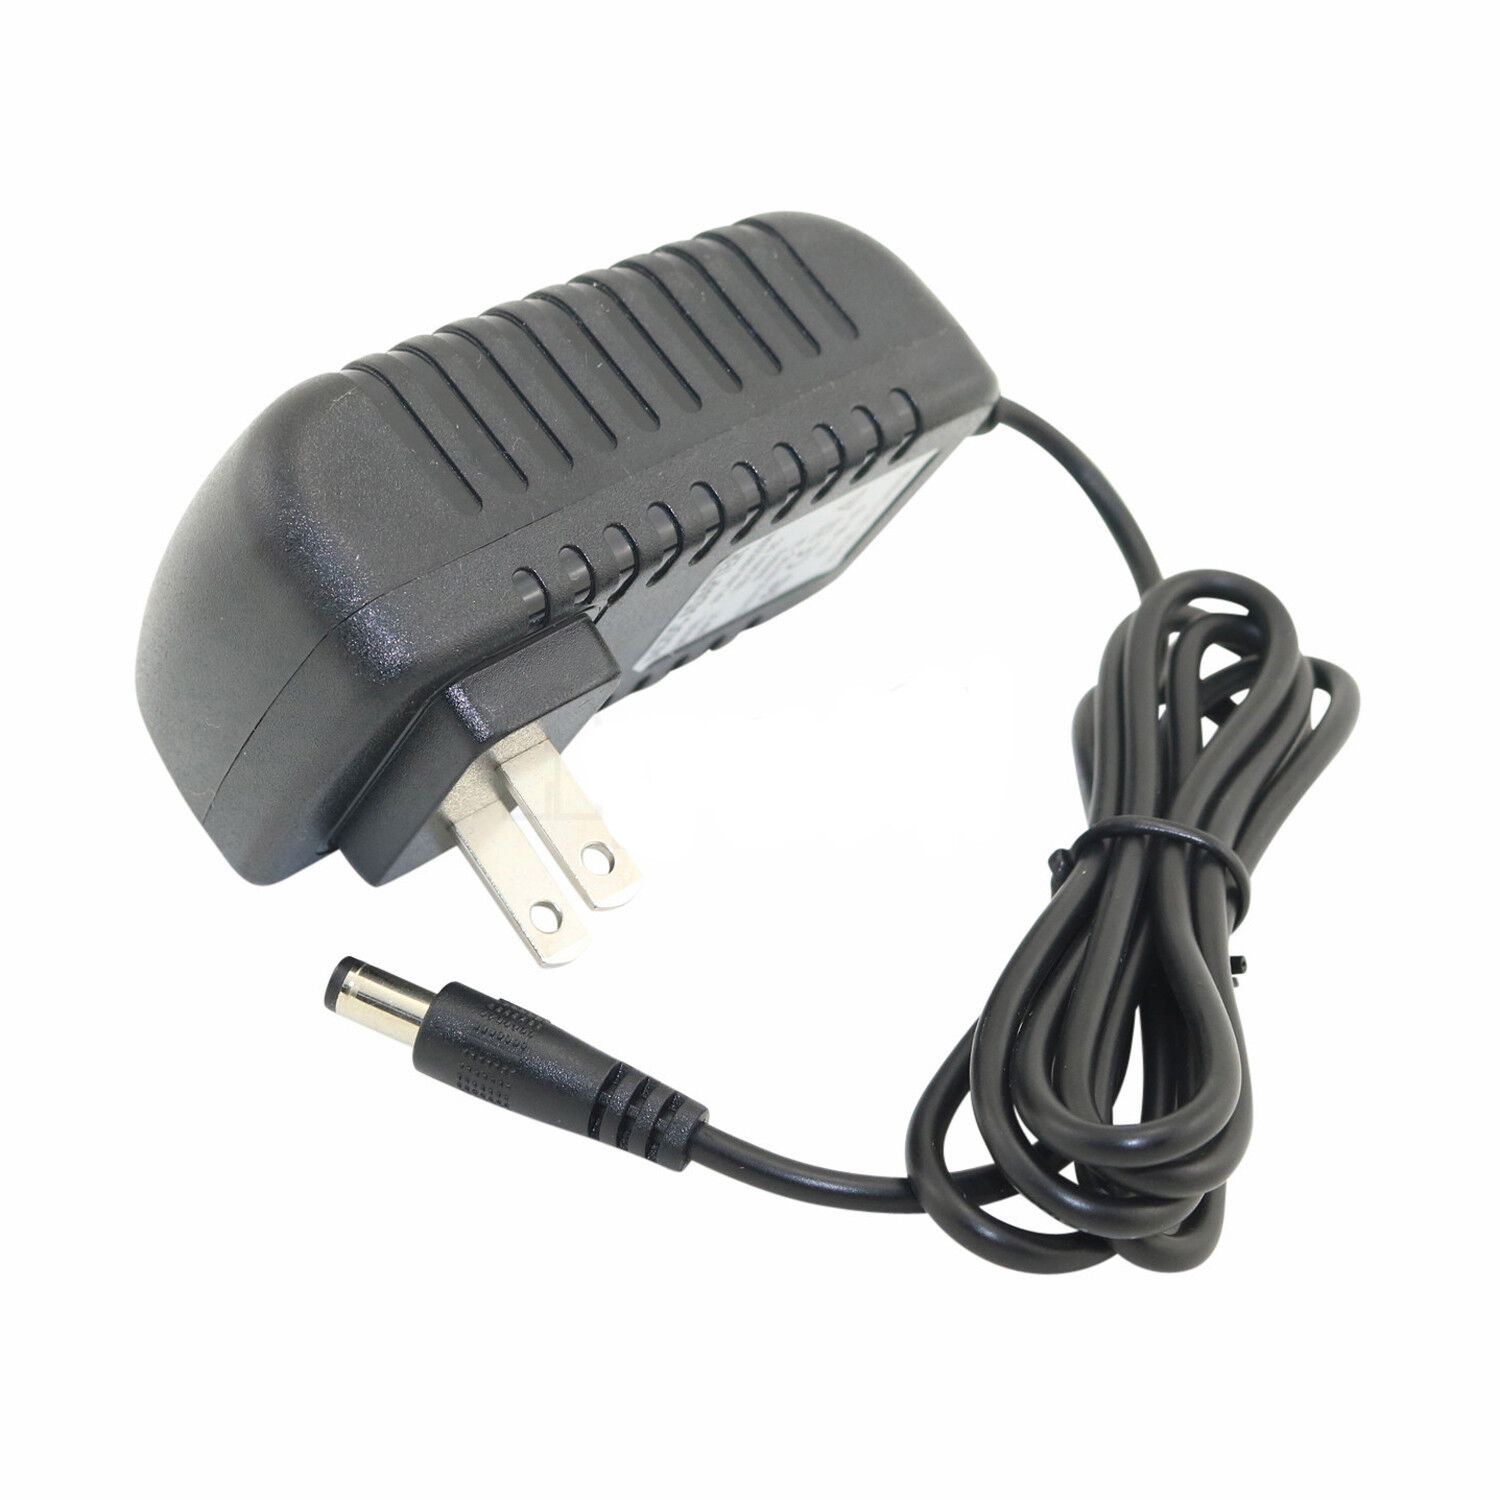 *Brand NEW* 7.4V Adapter PretiHom 5323 Percussion Massage Gun Impact Device Charger upgrade Power Supply